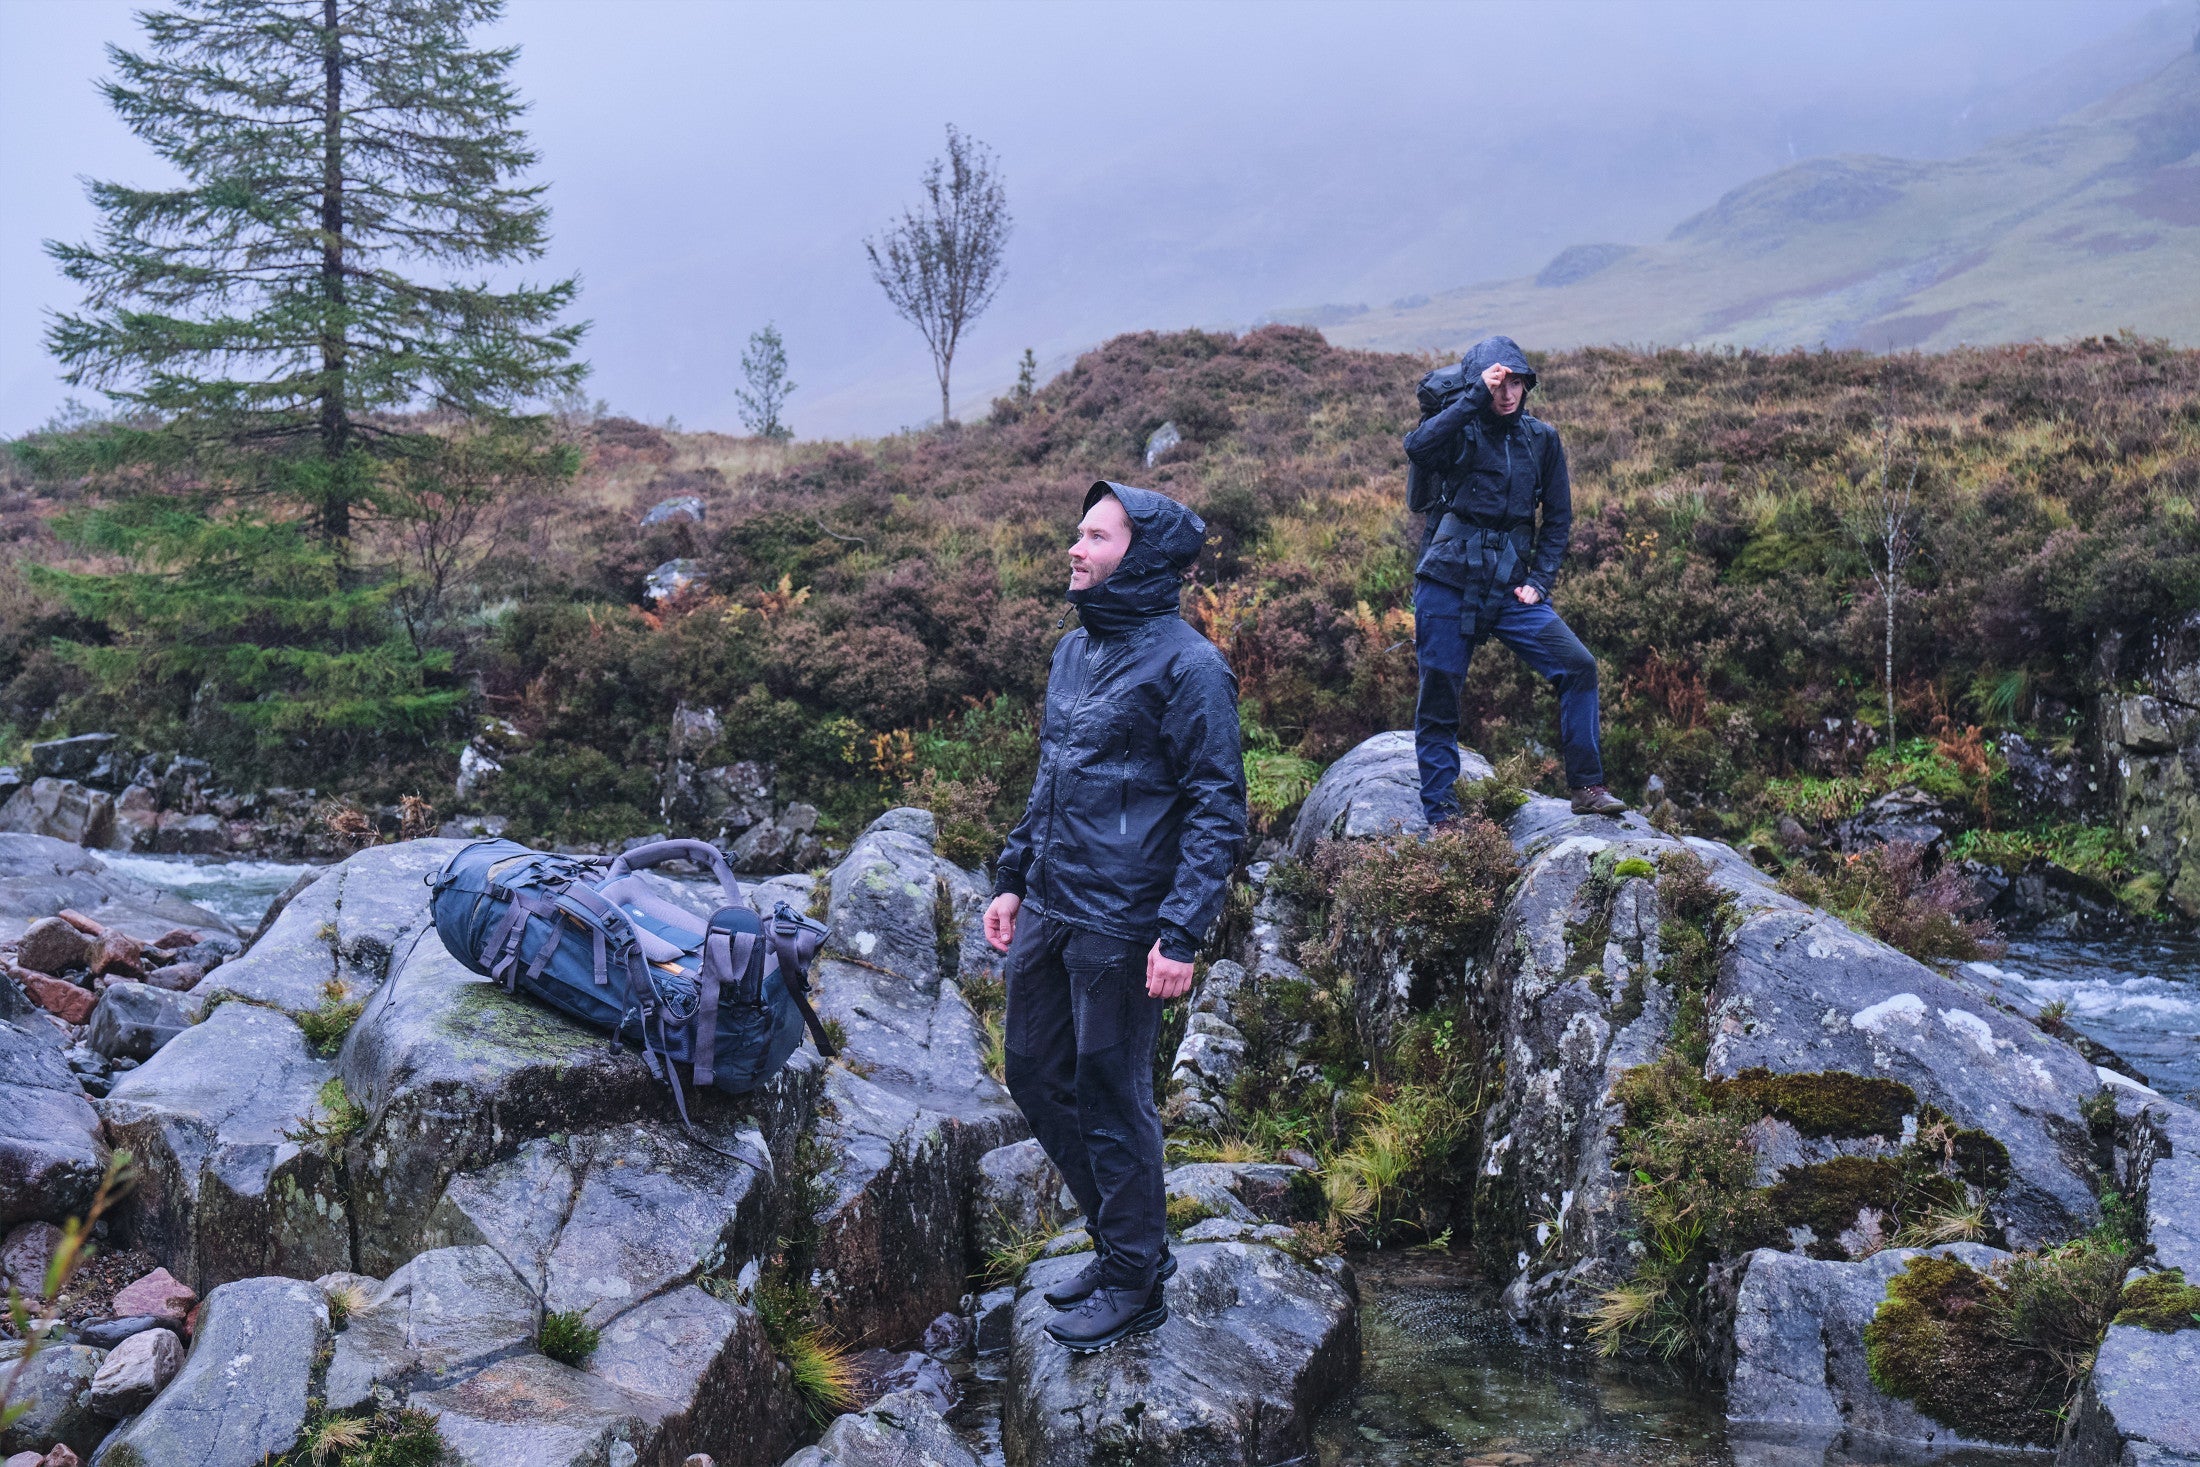 Fjern Orkan Jackets in 'Stealth' colourway on a rainy Highland moor